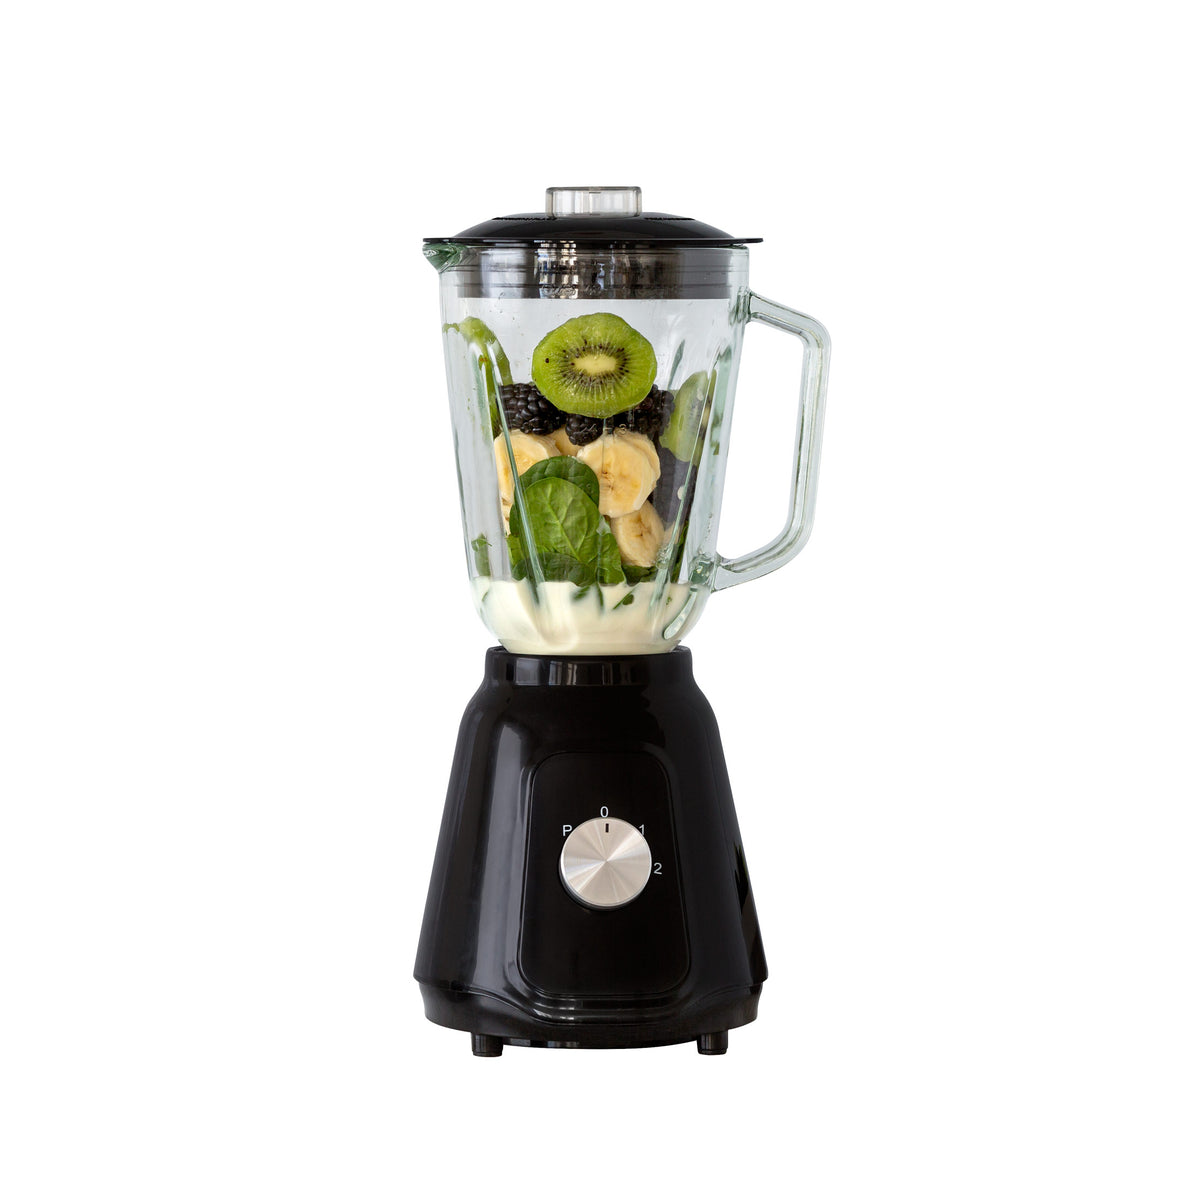 Black table blender filled with fruit ready to make a perfect smoothie.